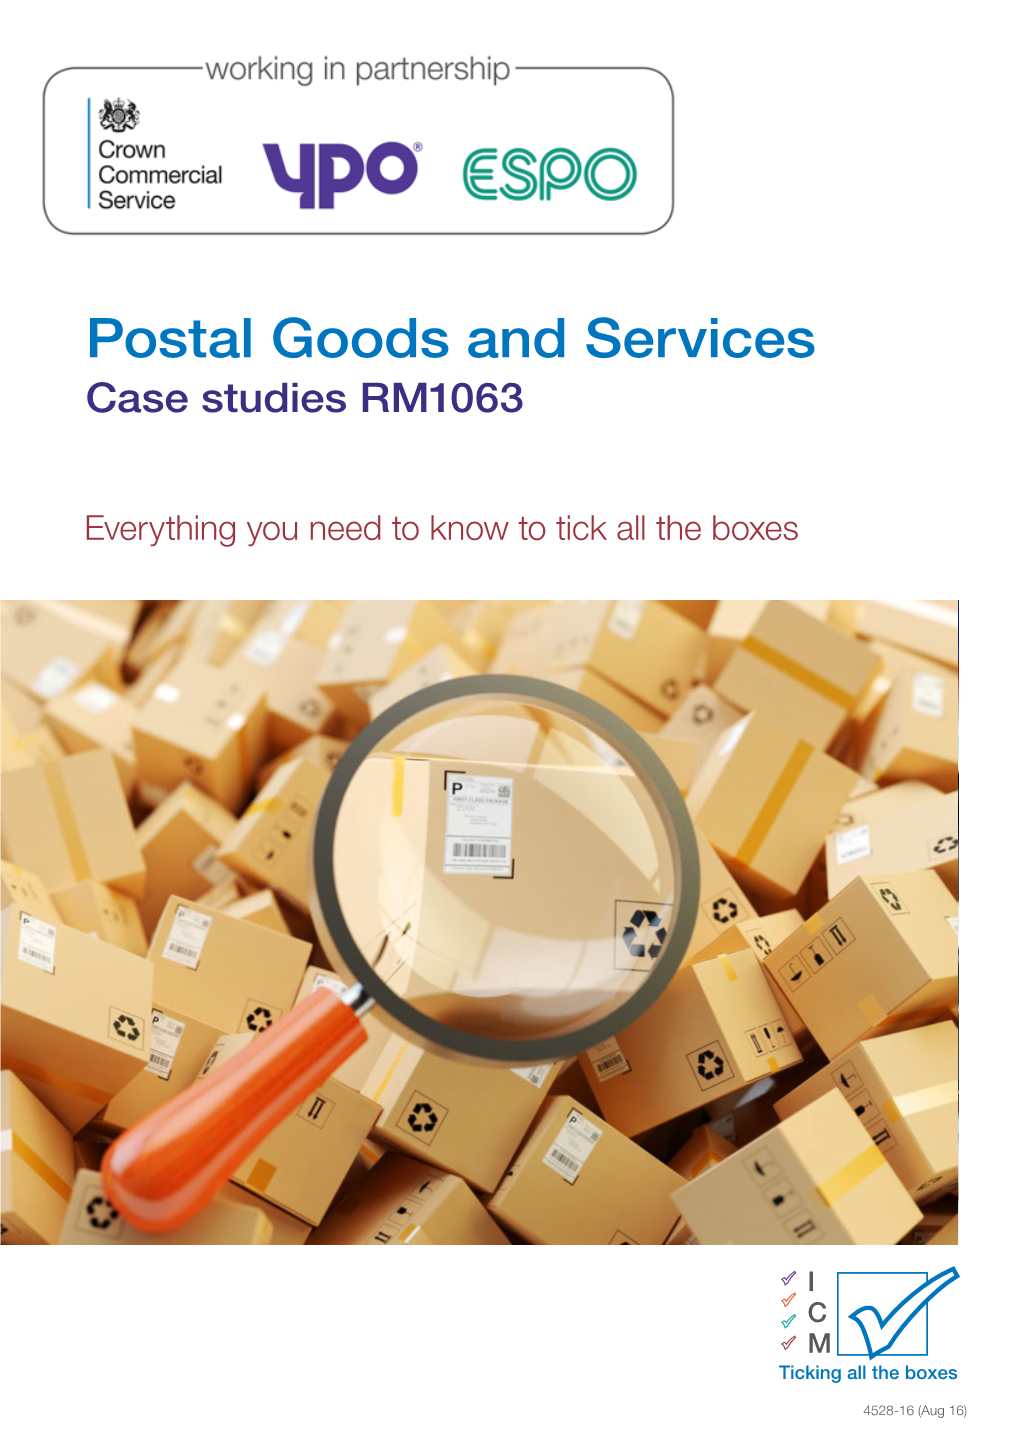 Postal Goods and Services Case Studies RM1063